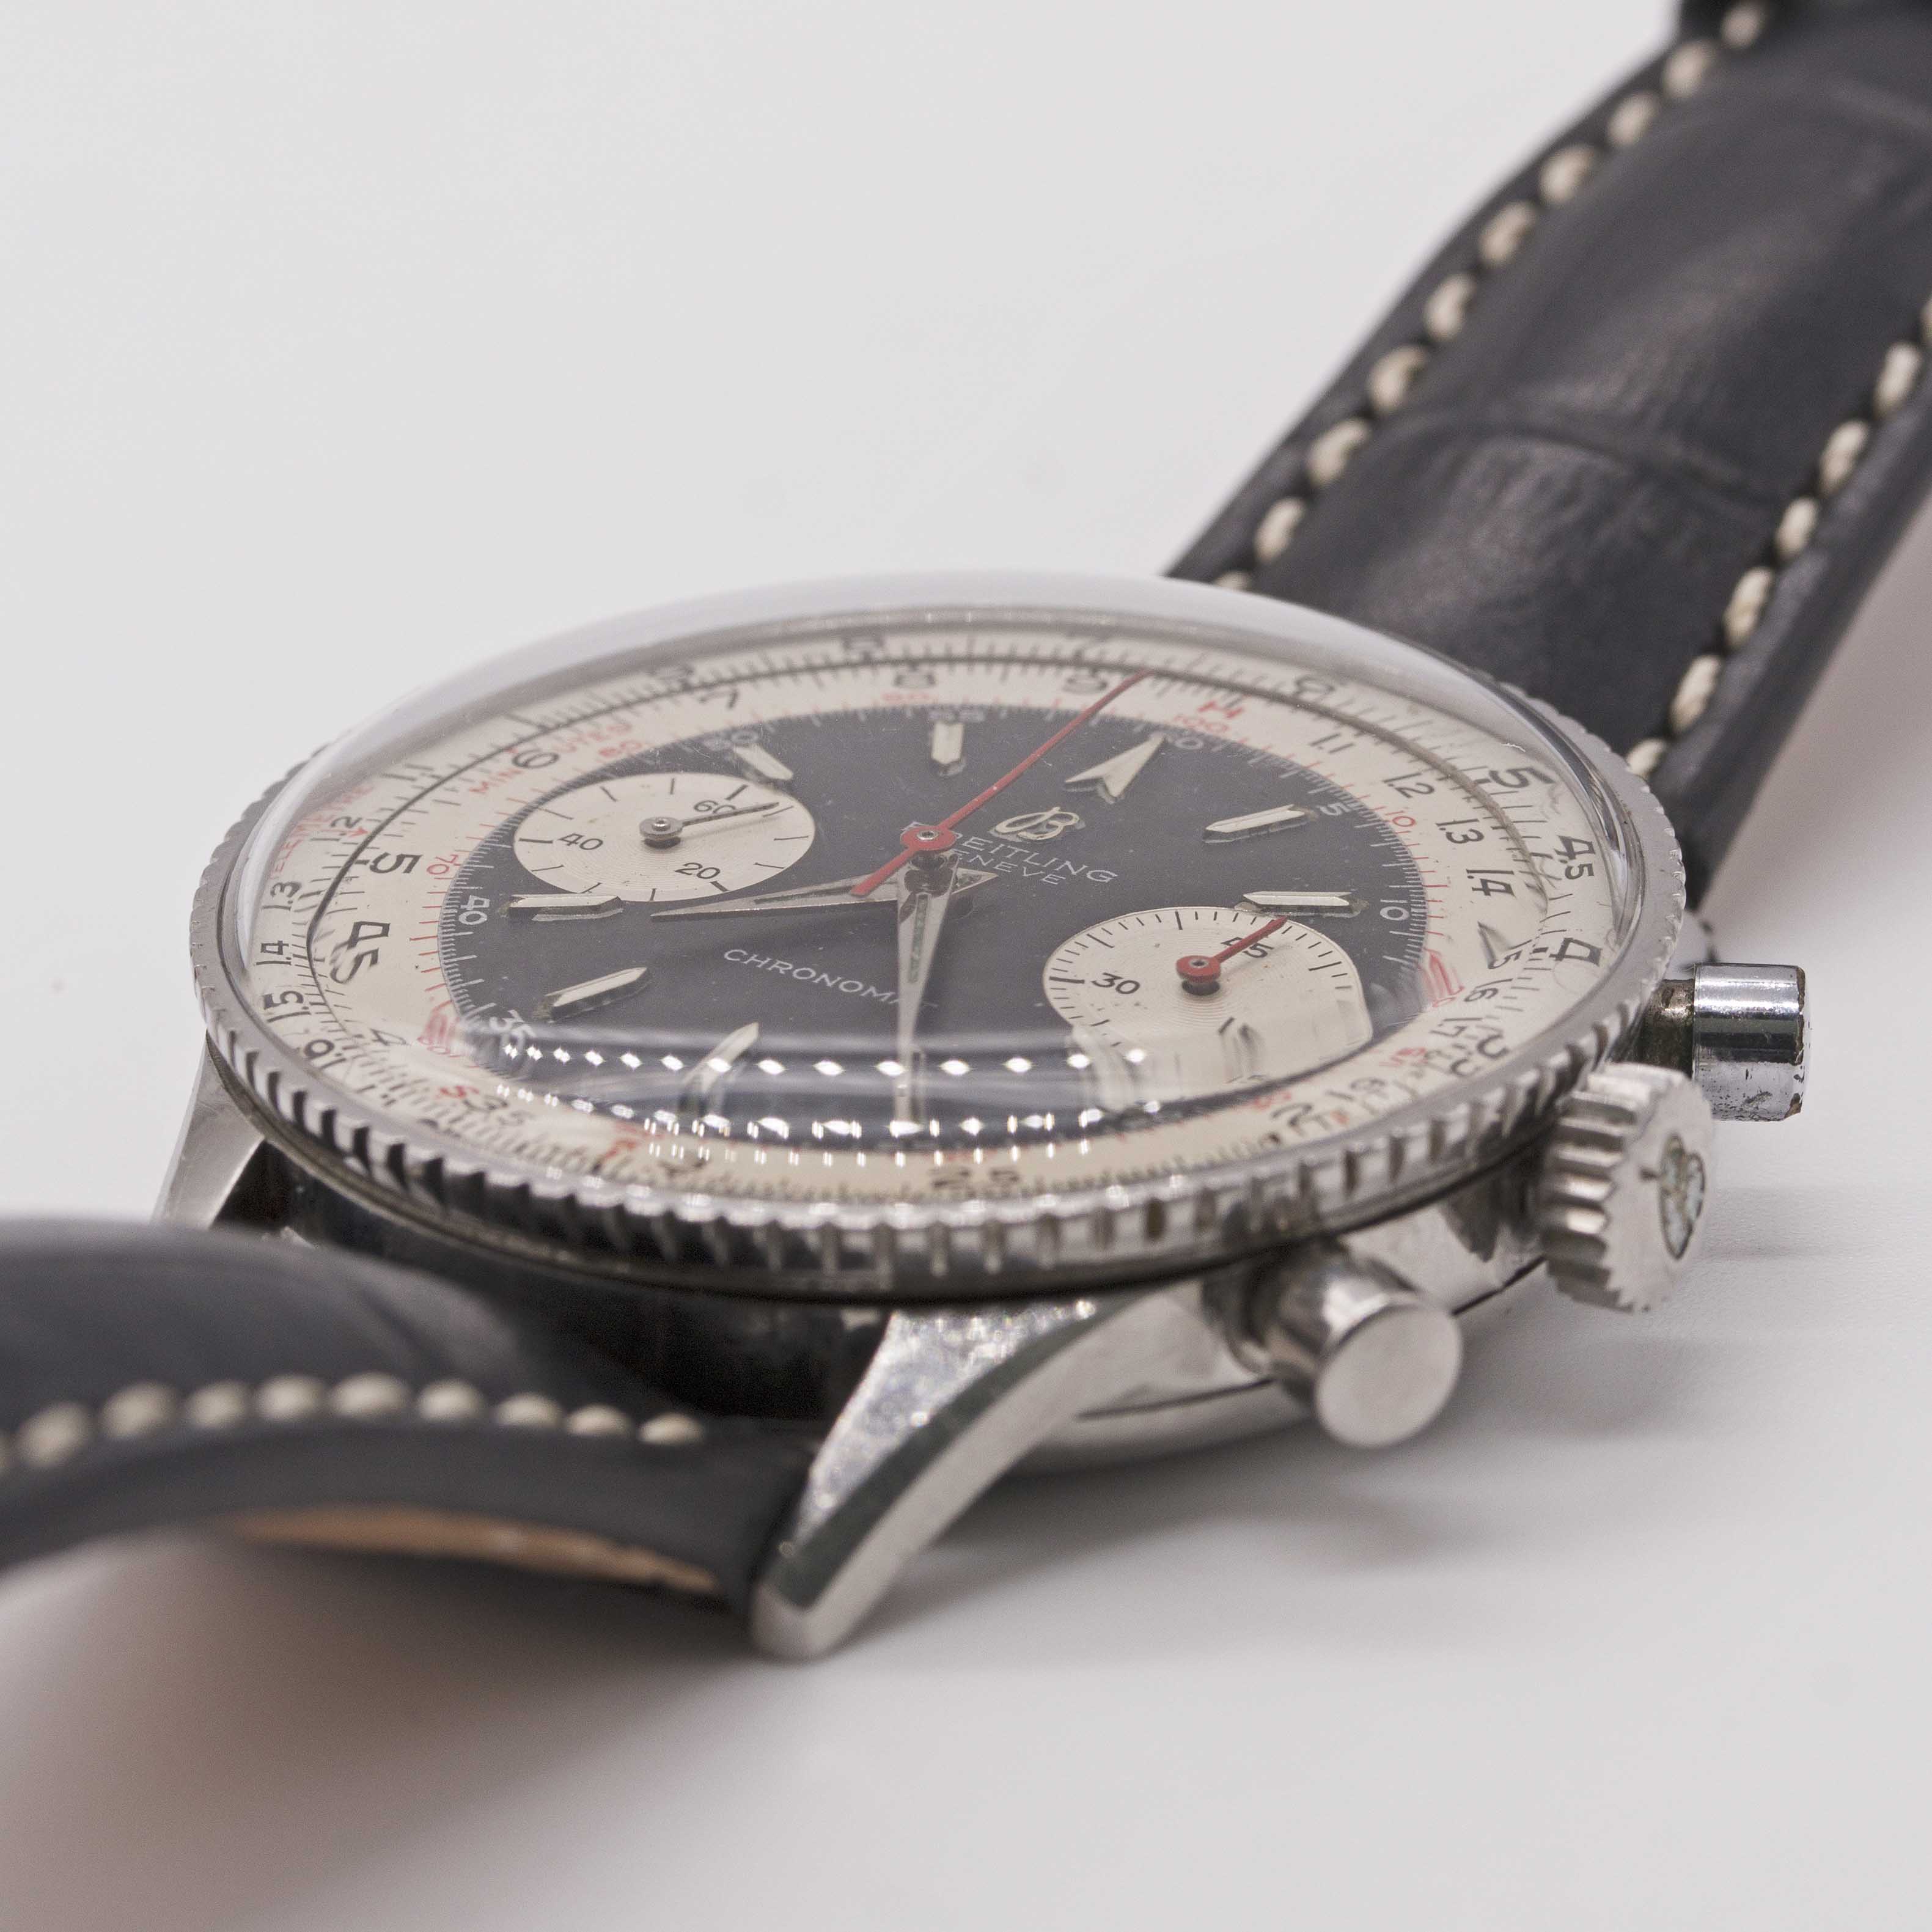 A GENTLEMAN'S STAINLESS STEEL BREITLING CHRONOMAT CHRONOGRAPH WRIST WATCH CIRCA 1963, REF. 808 - Image 3 of 10